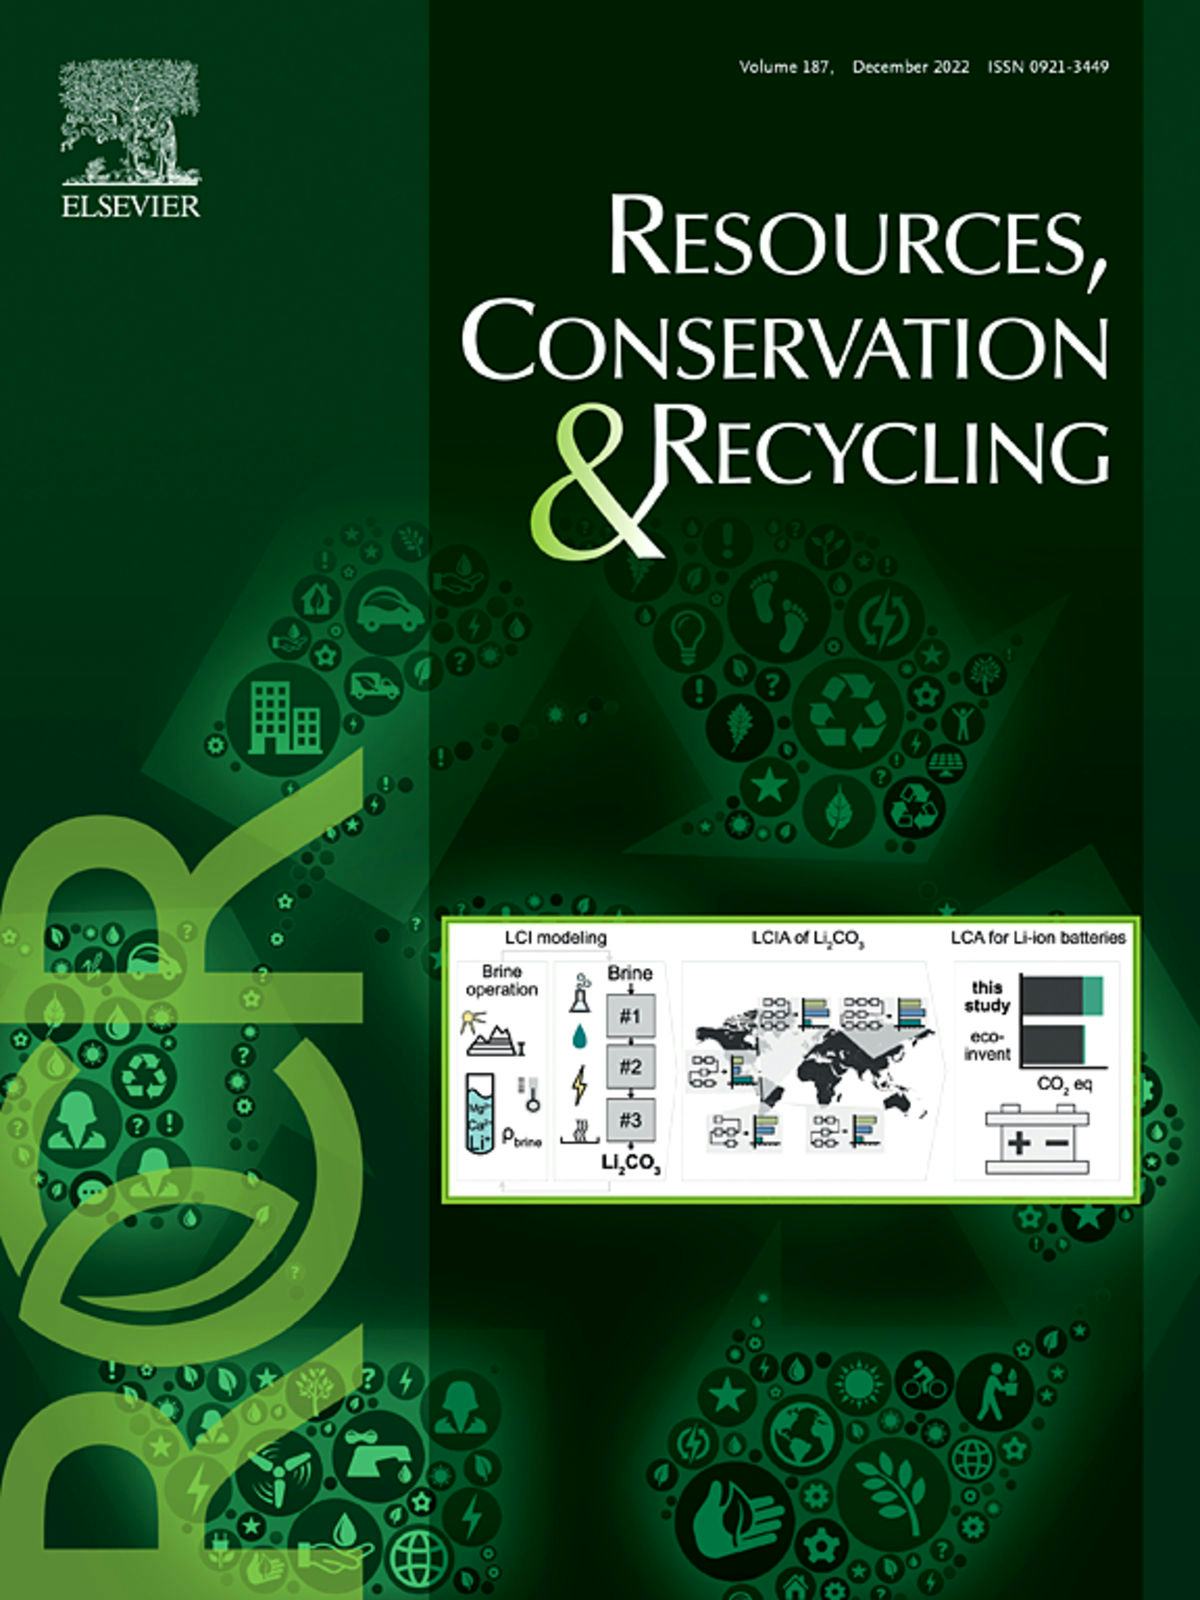 Resources, Conservation and Recycling book cover, volume 187, December 2022